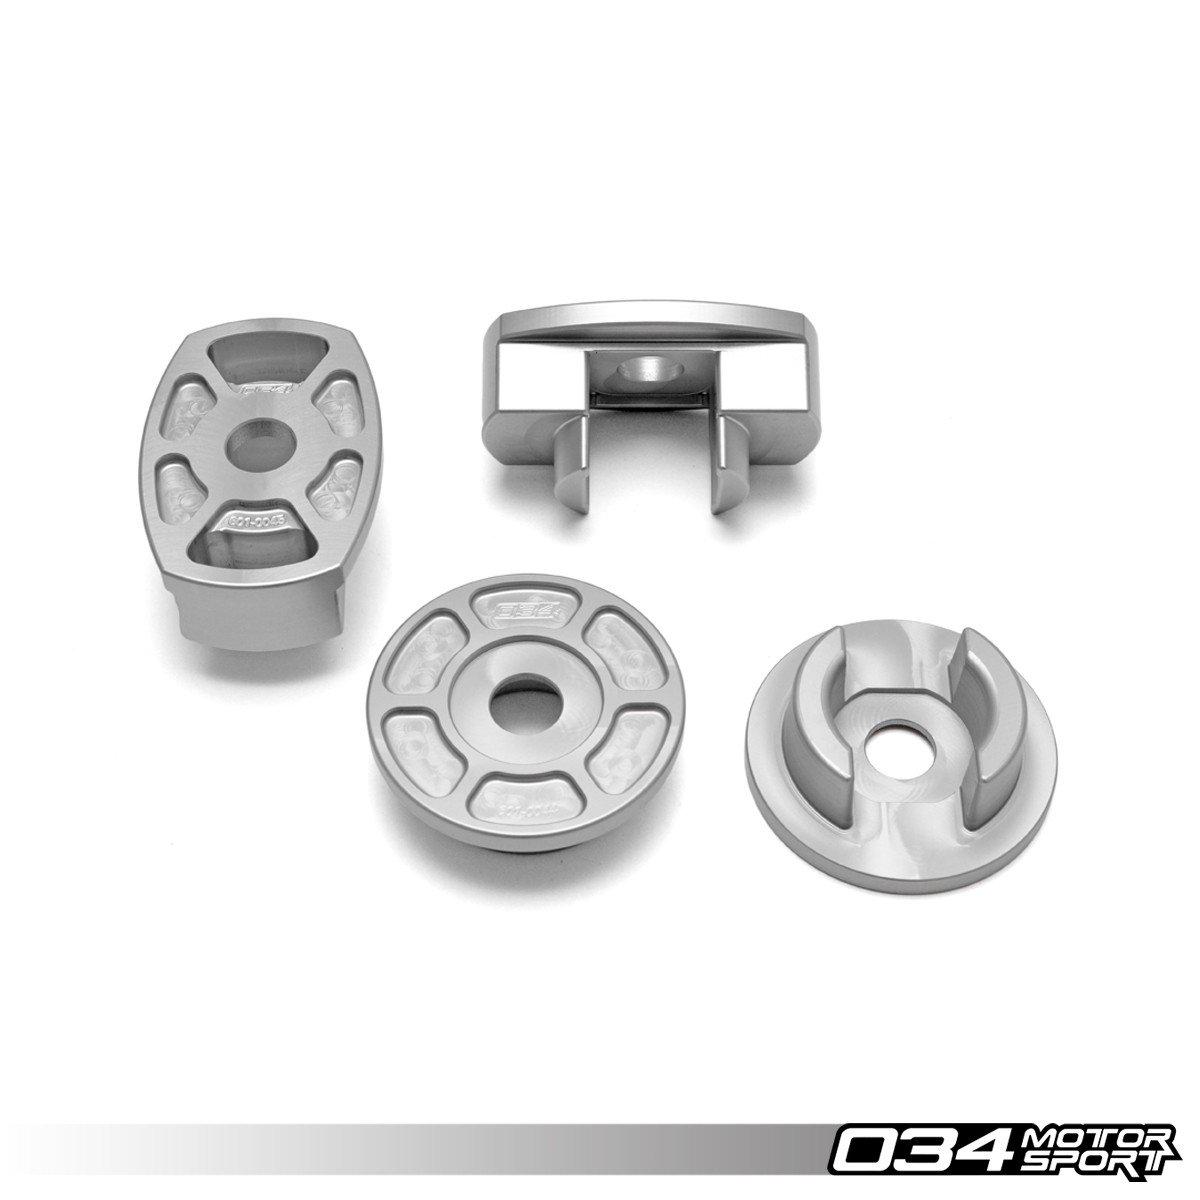 Billet Aluminum Rear Subframe Mount Insert Kit, B9 Audi A4/S4/A5/S5/RS5 &amp; Allroad-A Little Tuning Co